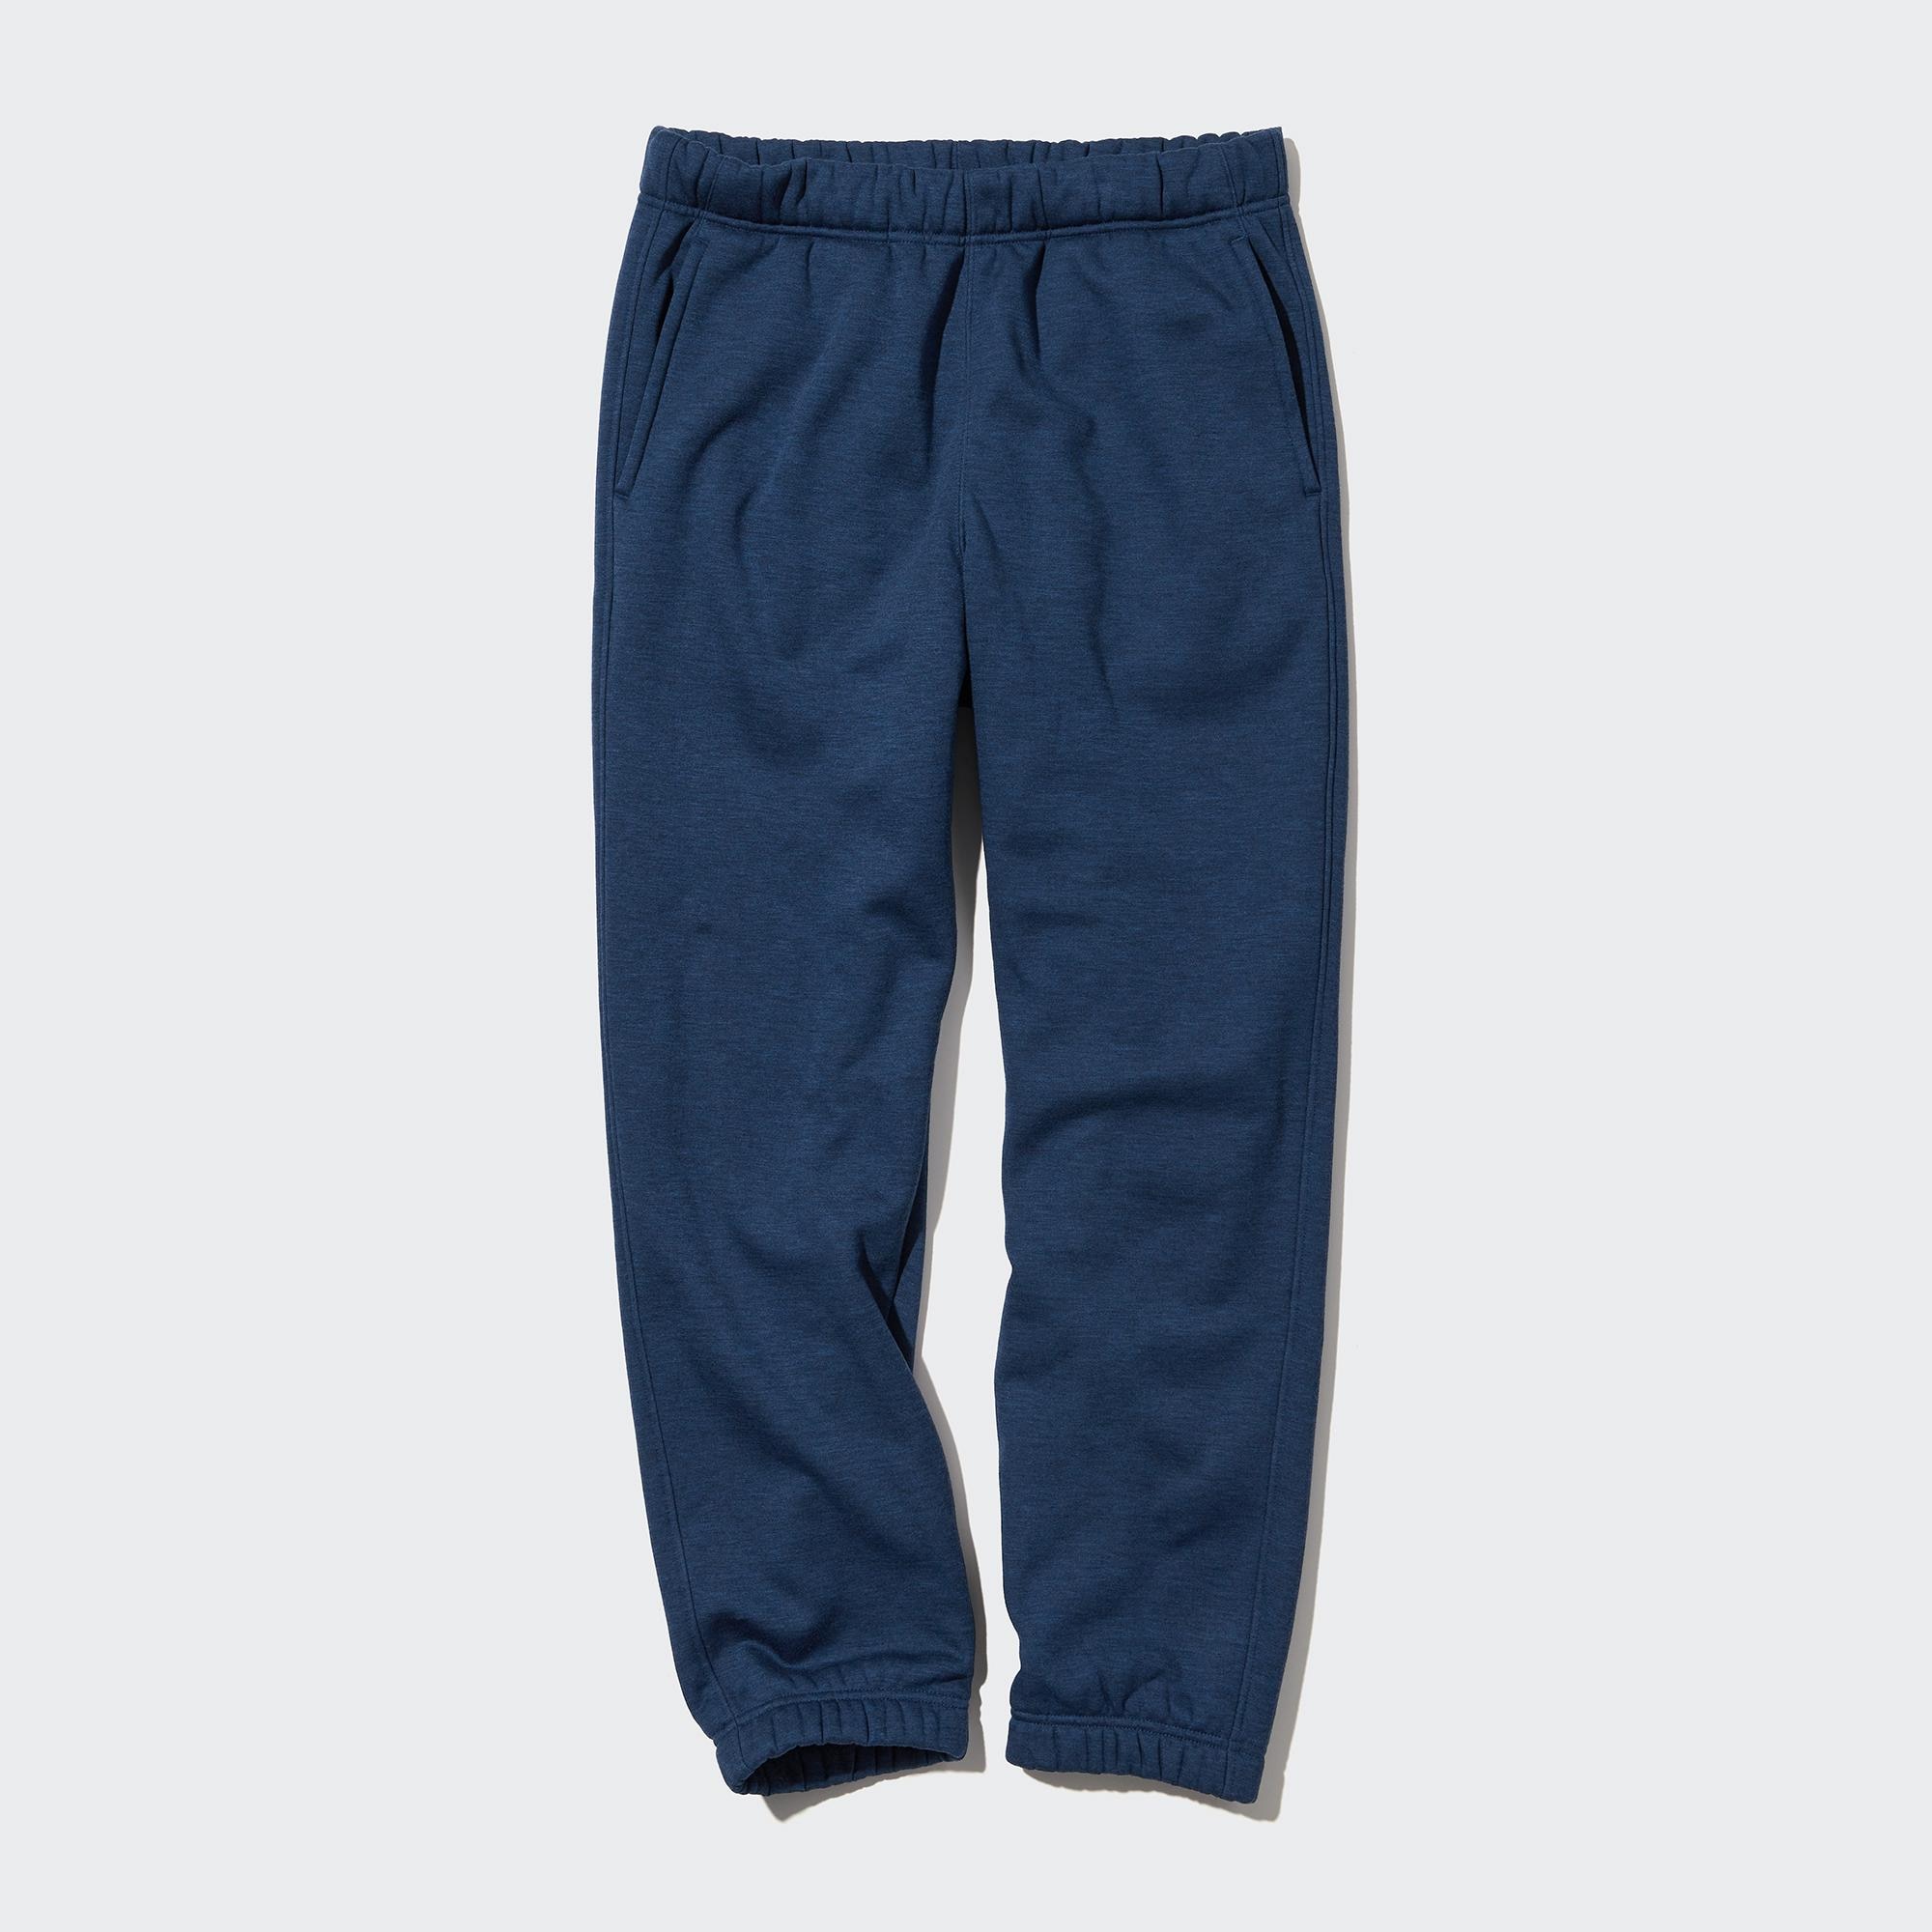 Men's WARM PANTS COLLECTION｜Warmth, even without layers-UNIQLO OFFICIAL  ONLINE FLAGSHIP STORE